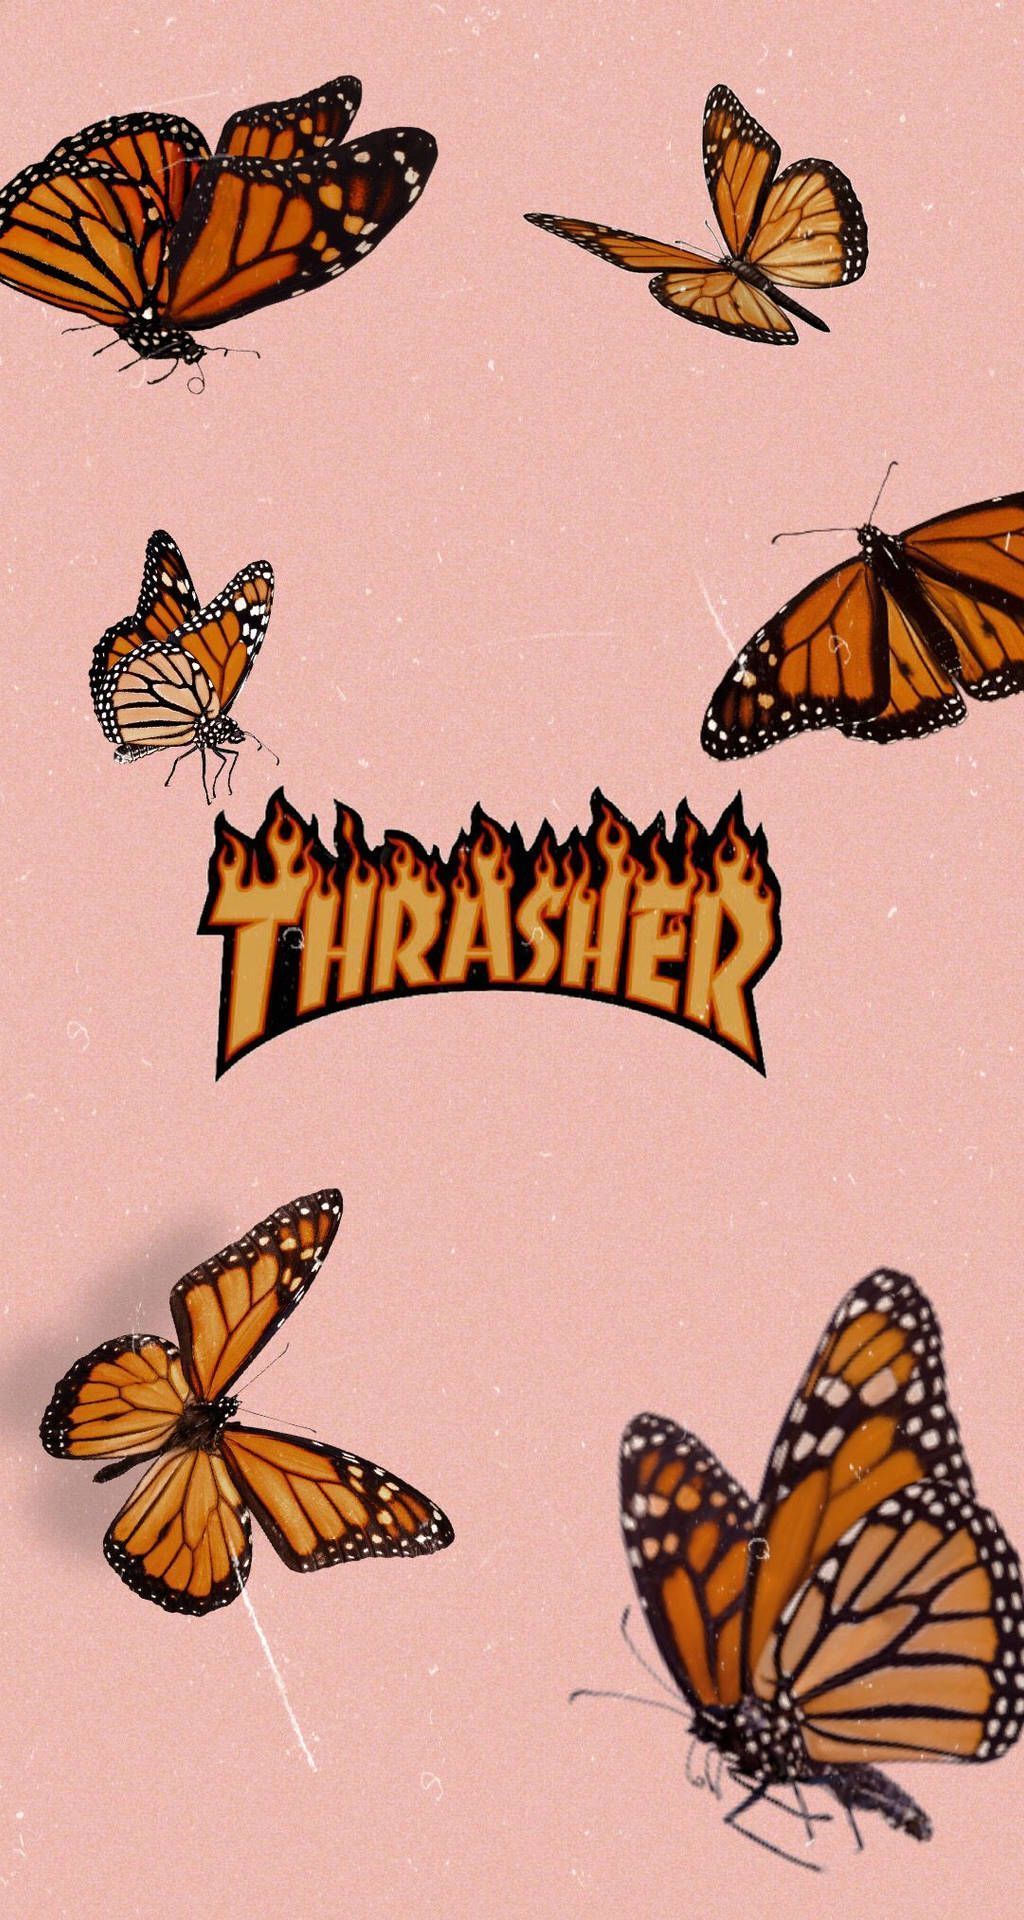 Download Thrasher Butterfly Aesthetic Wallpaper